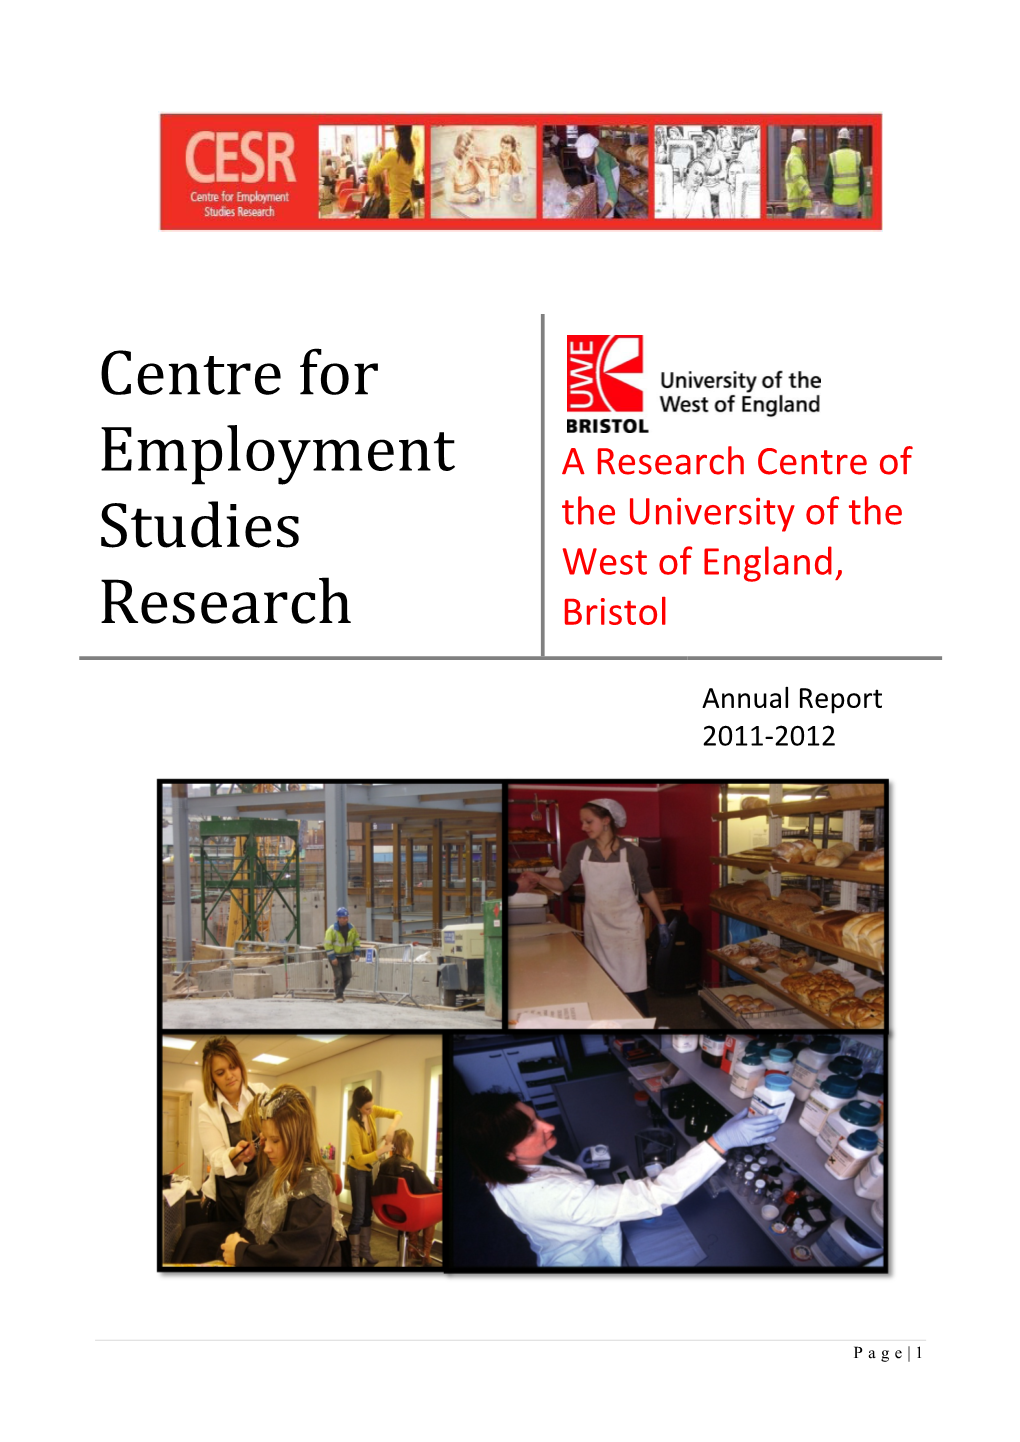 Centre for Employment Studies Research